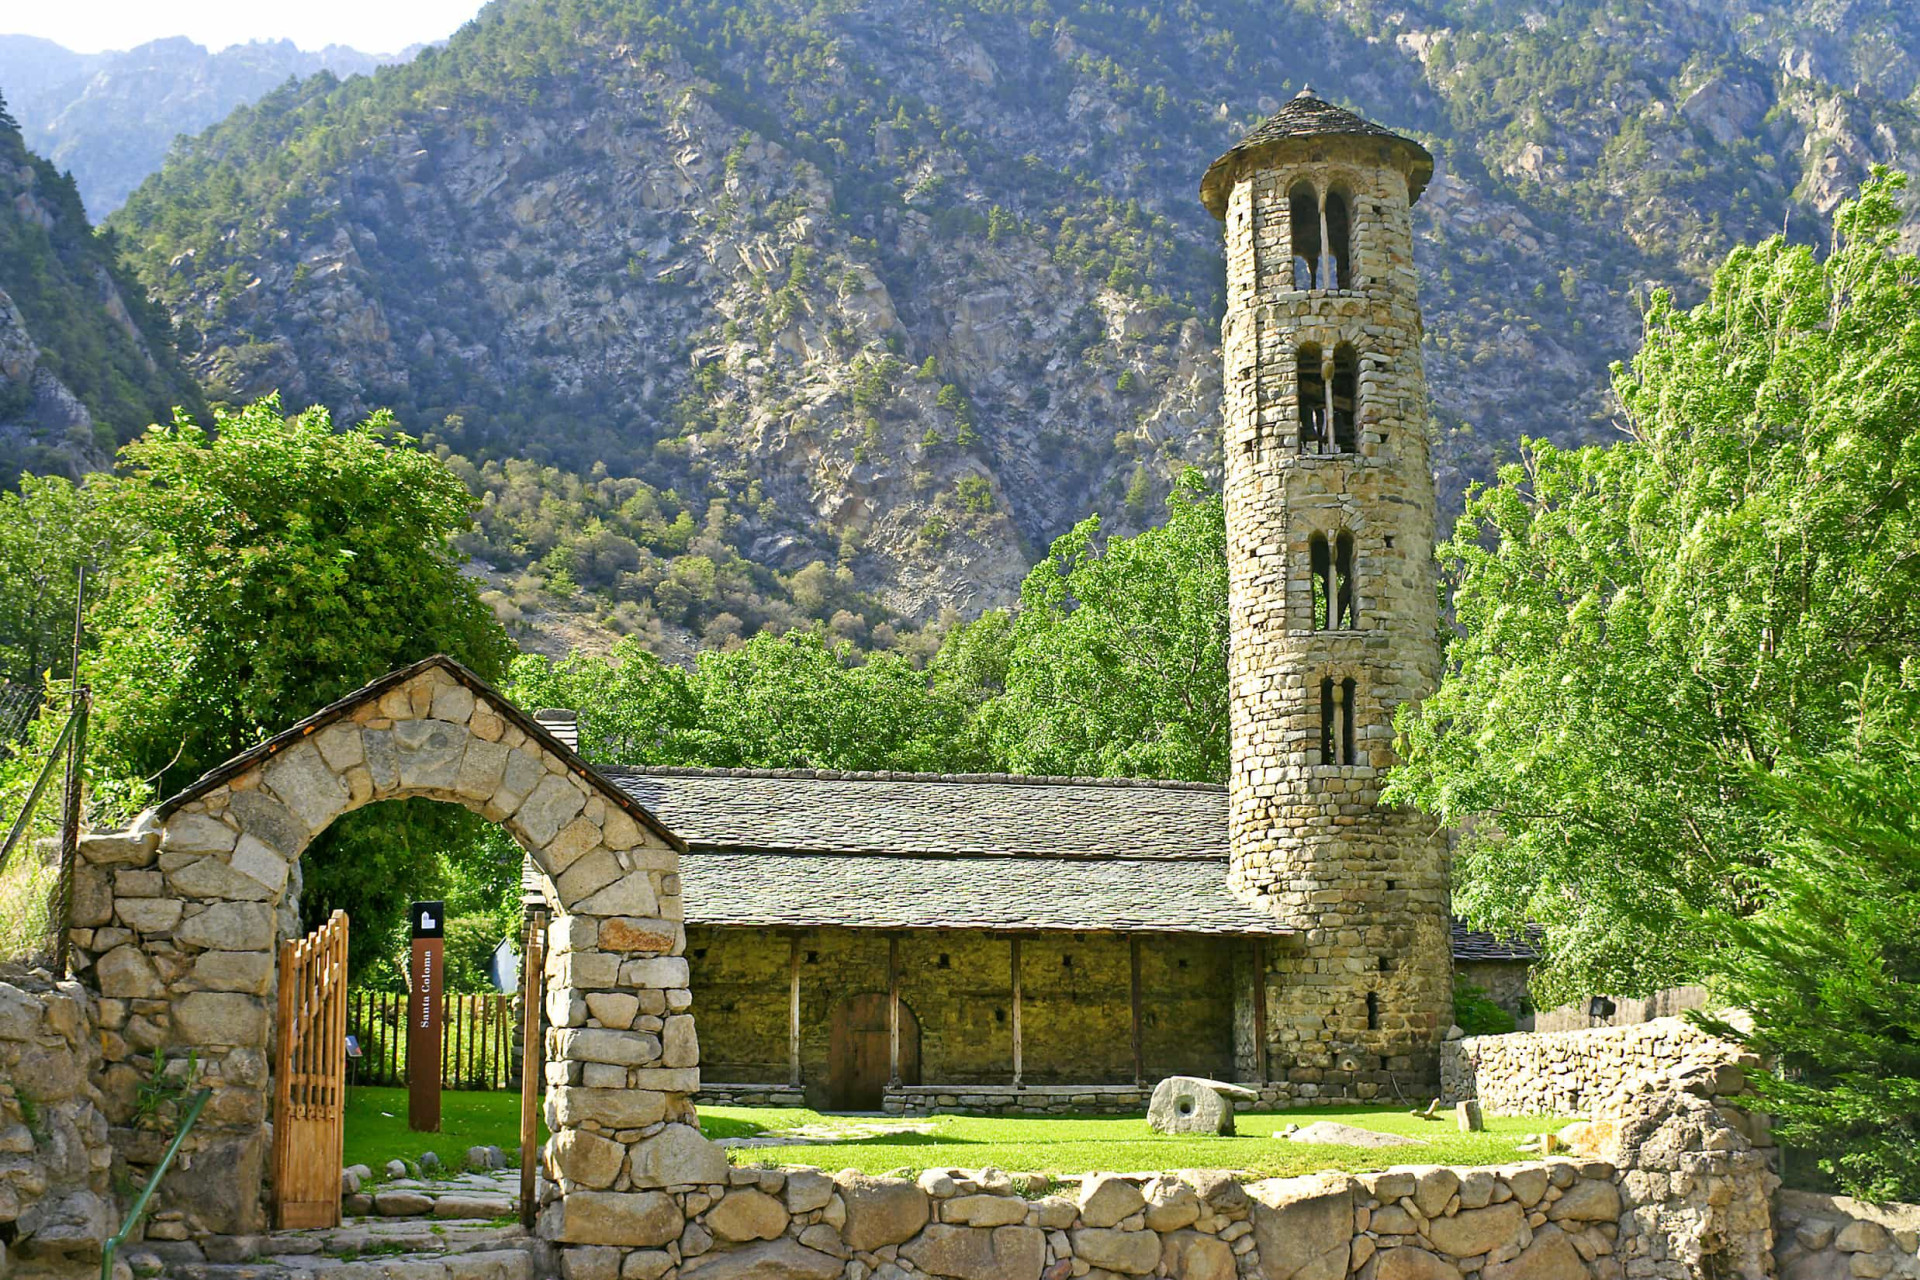 <p>Possibly the oldest church in all of Andorra is the Church of Santa Coloma, near Andorra la Vella. Built around the 8th century, the pre-Romanesque church is one of the only of its kind in Andorra, and features original religious frescoes on the interior.</p><p><a href="https://www.msn.com/en-za/community/channel/vid-7xx8mnucu55yw63we9va2gwr7uihbxwc68fxqp25x6tg4ftibpra?cvid=94631541bc0f4f89bfd59158d696ad7e">Follow us and access great exclusive content every day</a></p>